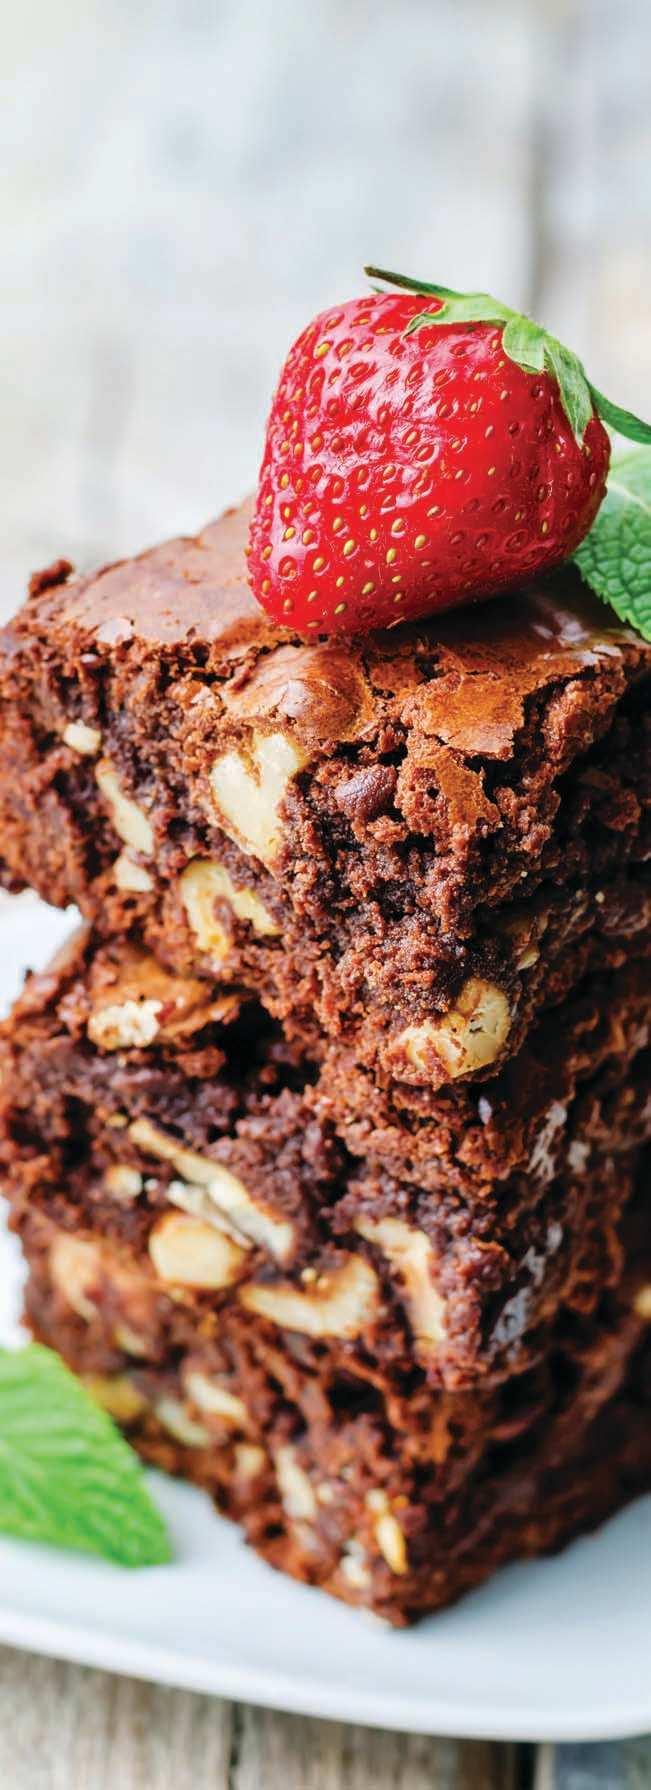 Chocolate and macadamia nut brownies Serves 6 Ingredients 125 grams unsalted butter 100 grams dark chocolate 220 grams caster sugar ½ cup (125ml) hot water 3 teaspoons espresso coffee 40 grams cocoa